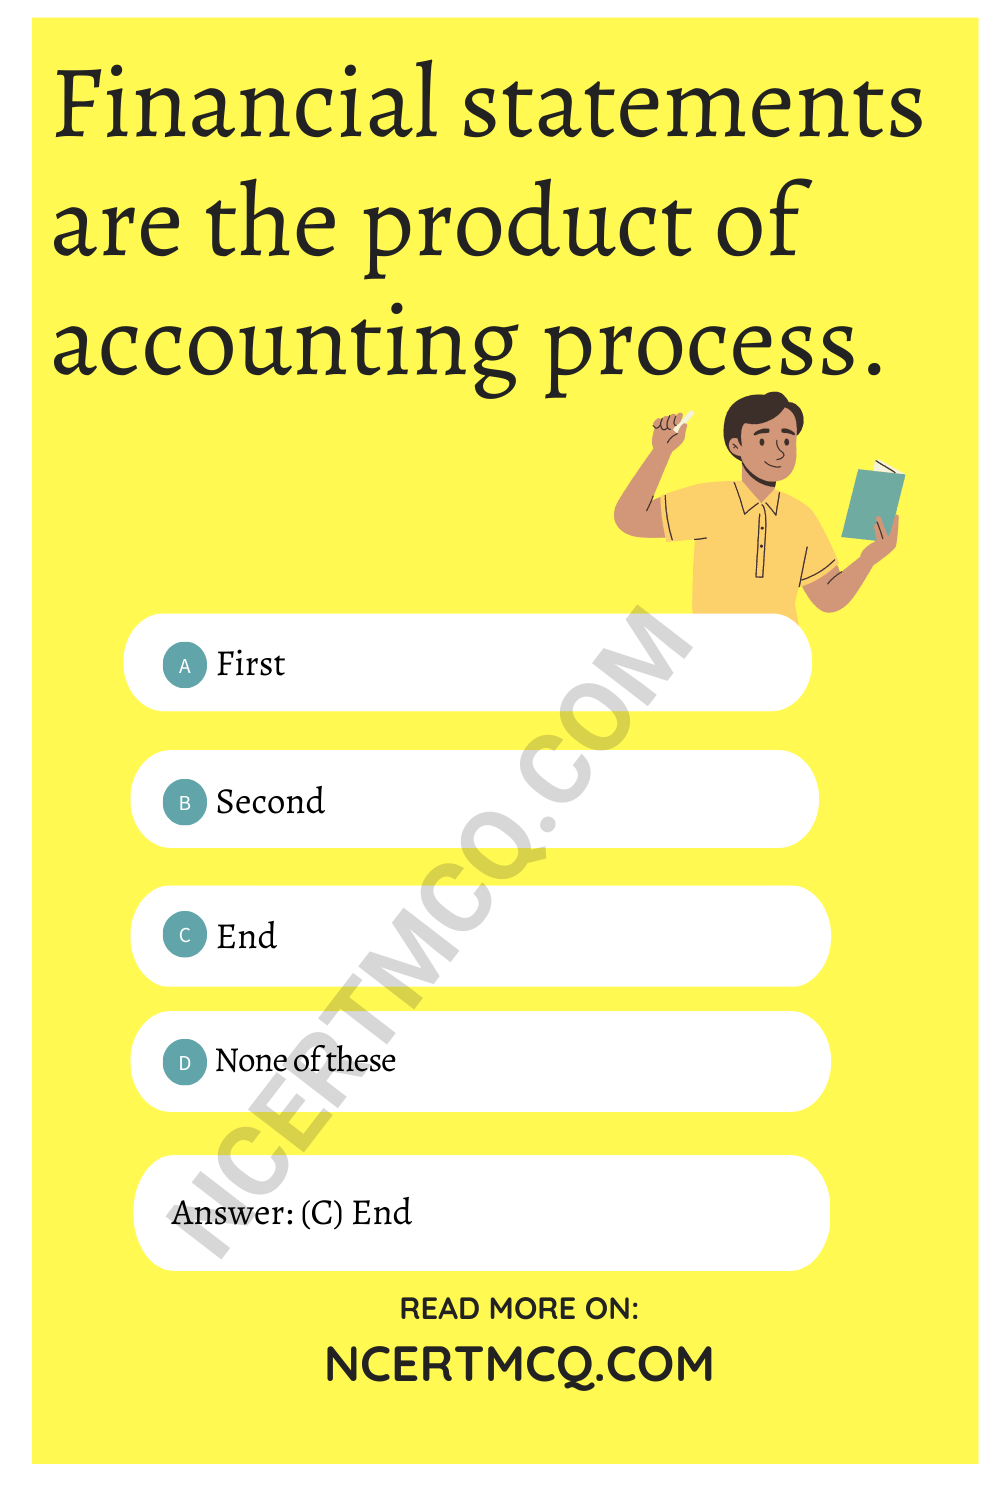 Financial statements are the product of accounting process.